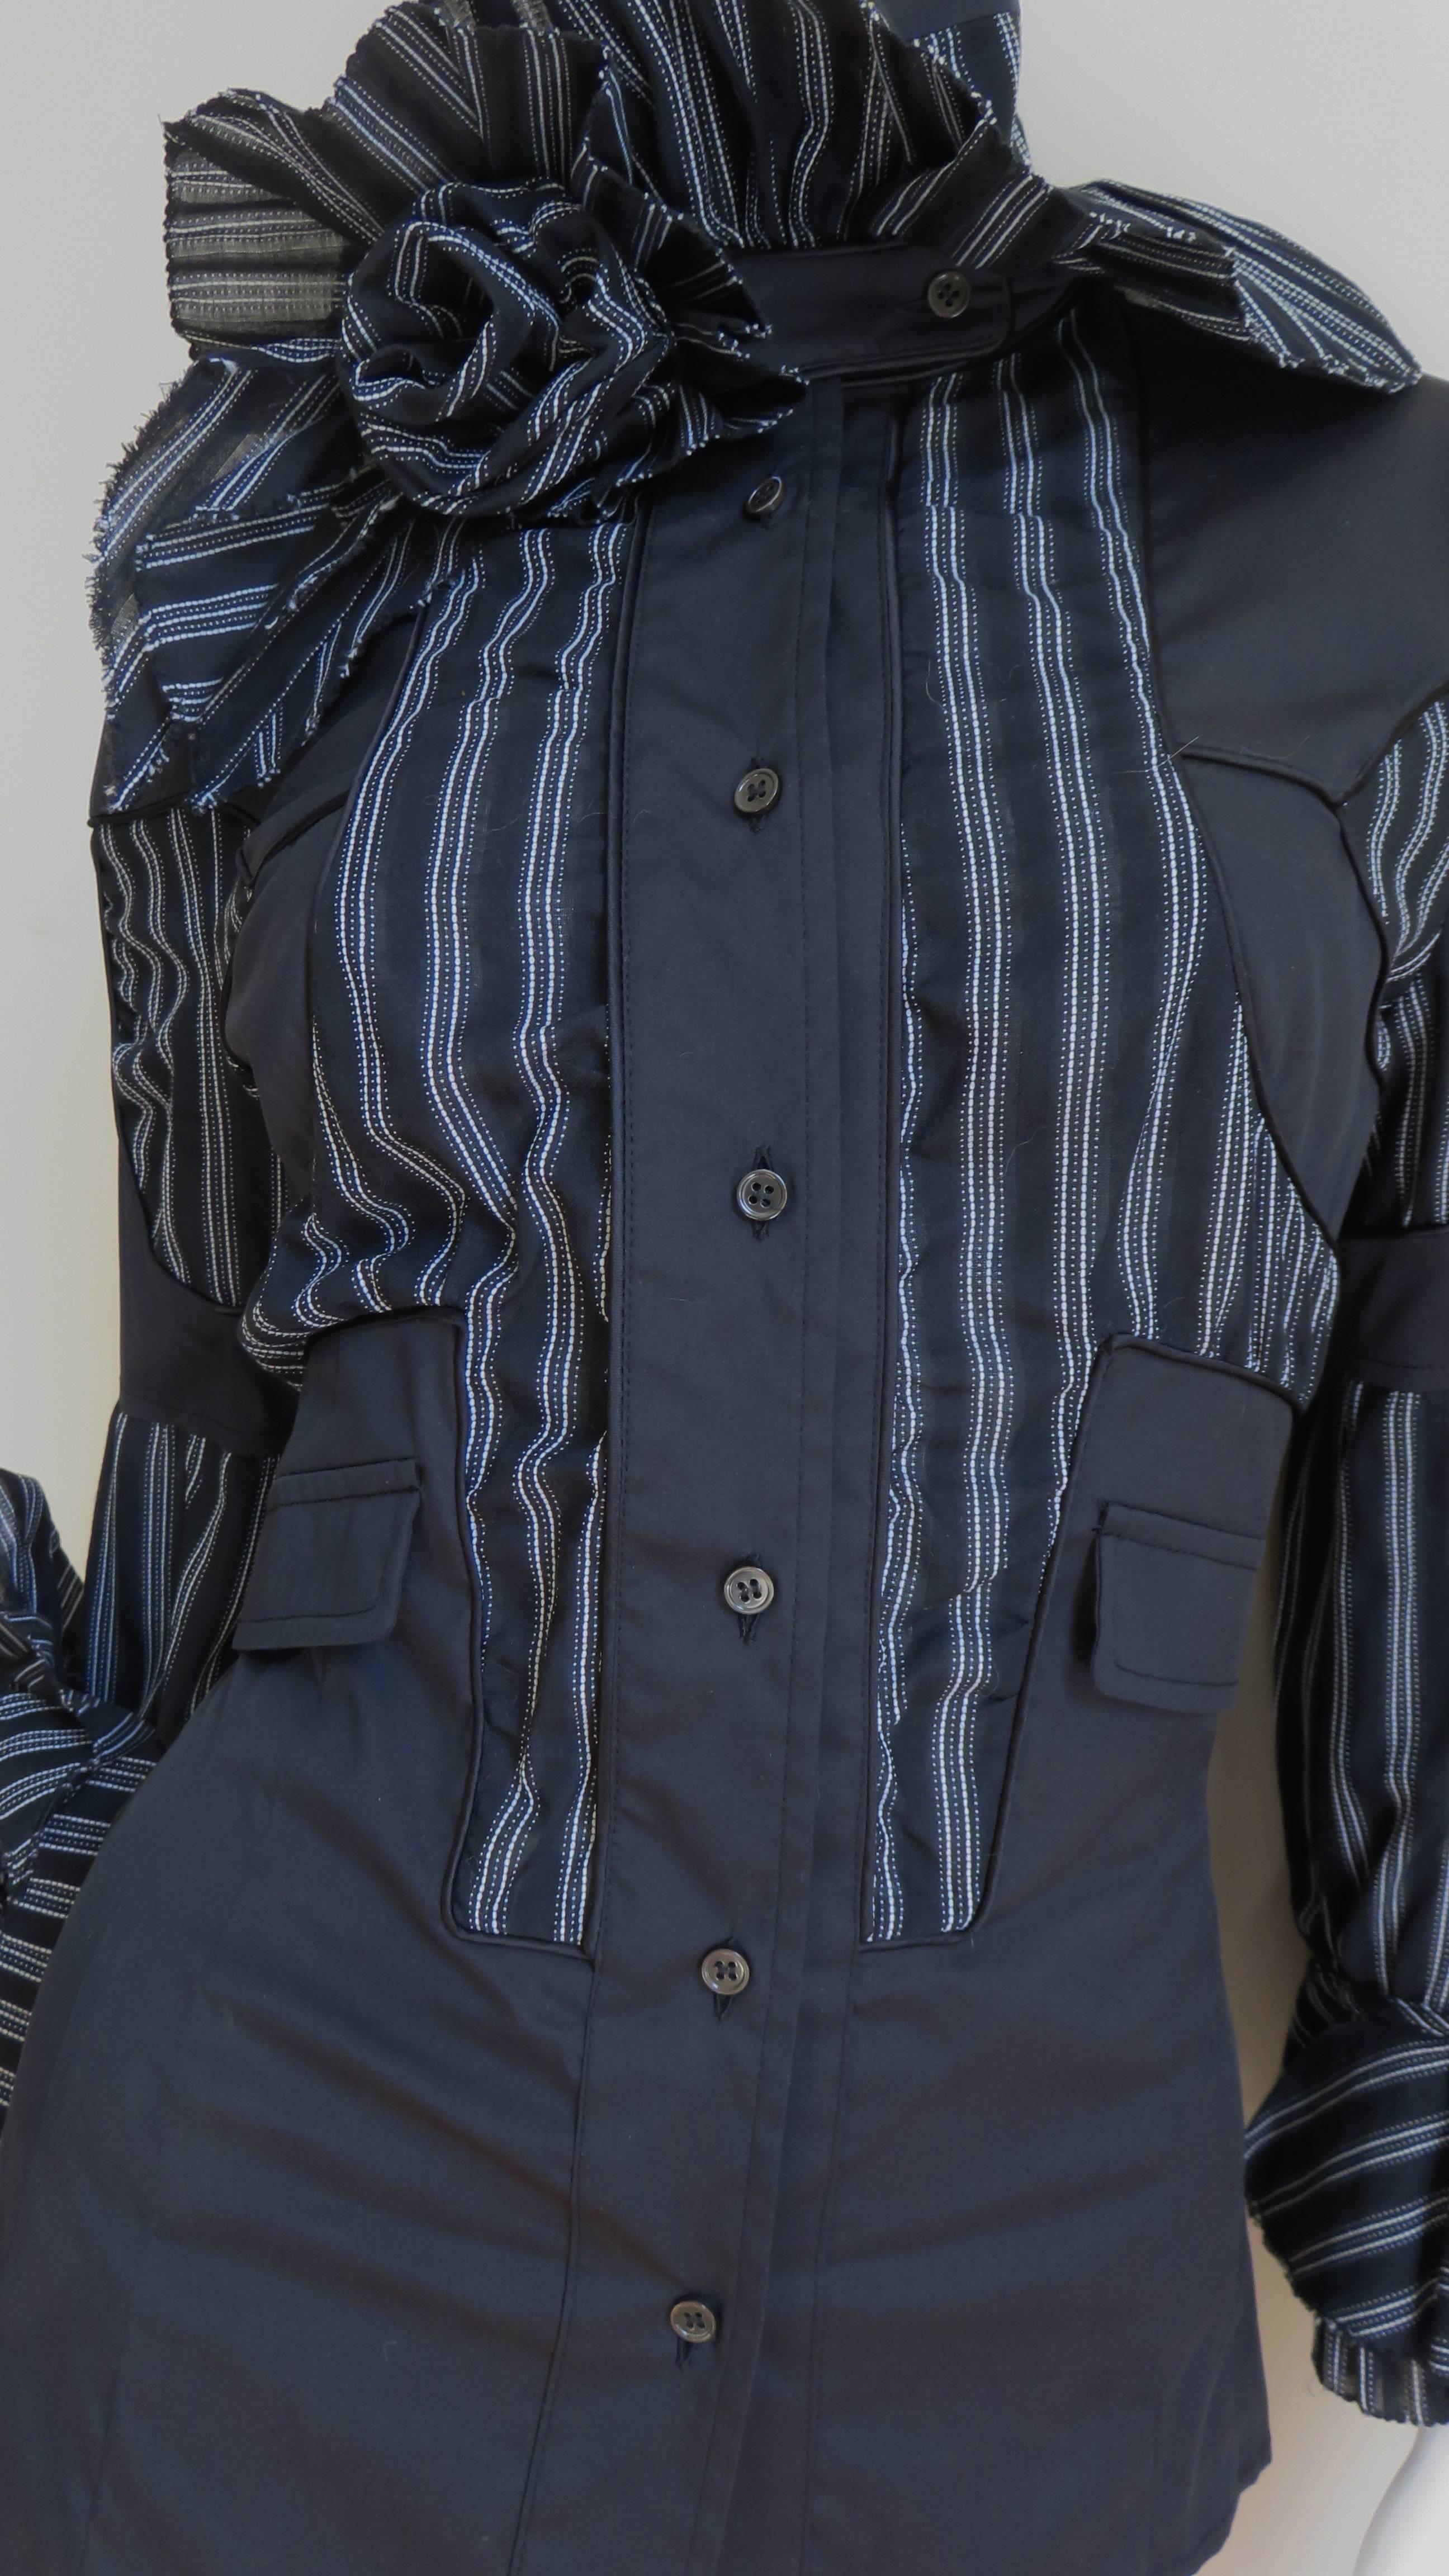 A gorgeous shirt or jacket from Antonio Berardi in solid black and black with white stripes silk cotton blend with a bit of stretch. It has lots of details- fabric roses and ruffles at the neck and wrists, a buttoned stand up collar, pockets at the